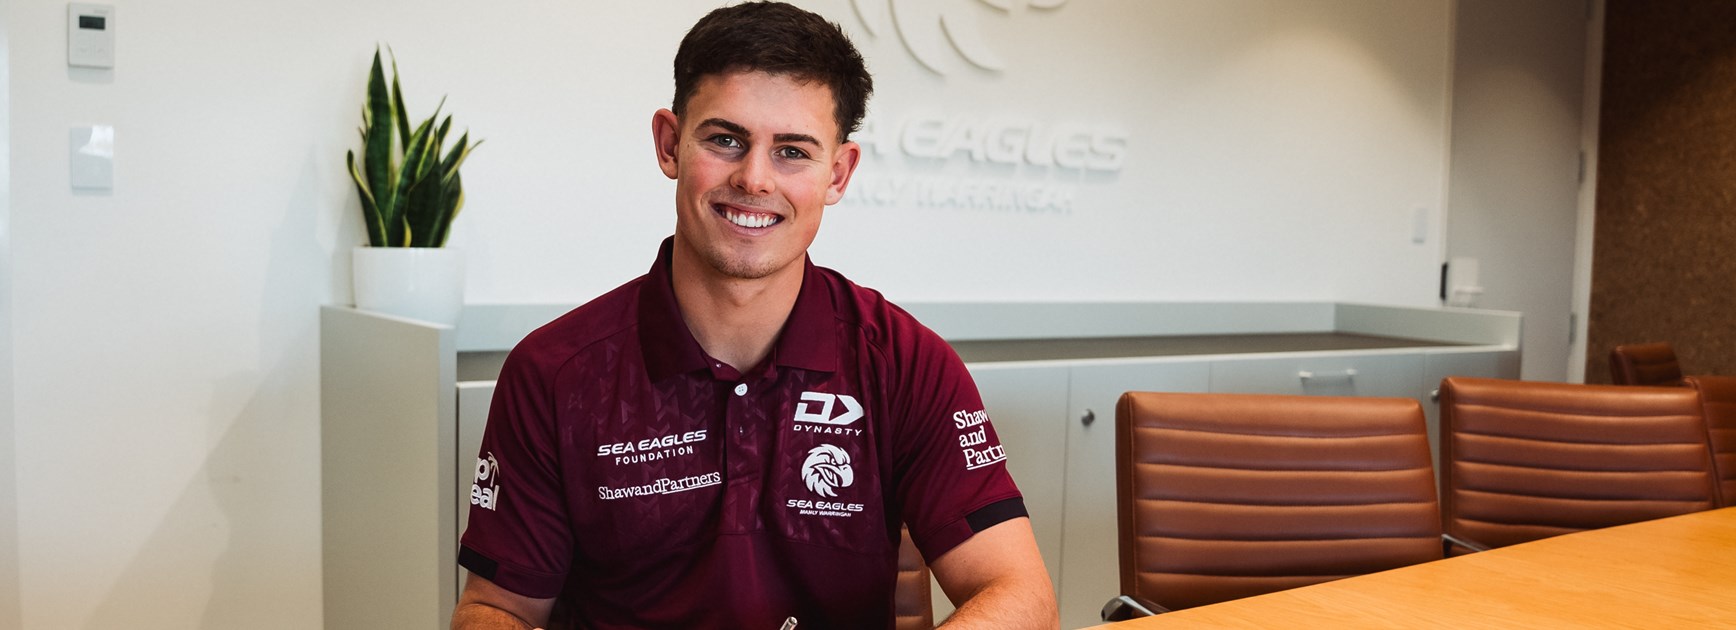 Sea Eagles sign exciting young half Joey Walsh